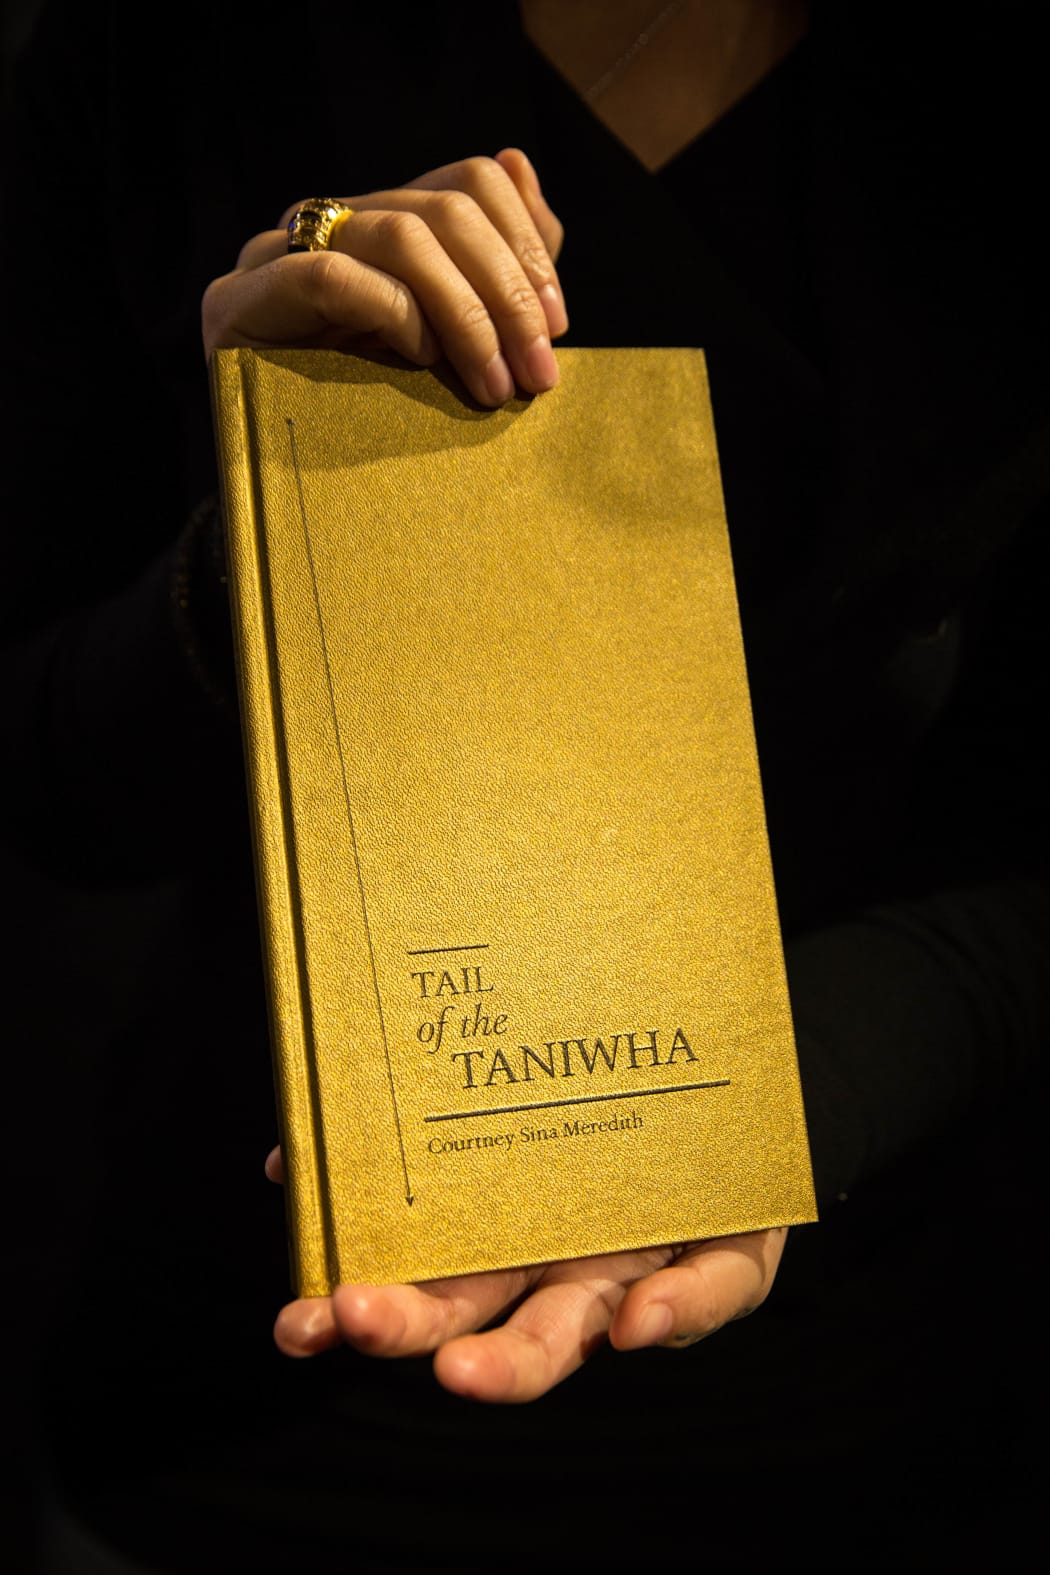 Courtney Sina Meredith's book, Tail of teh Taniwha.